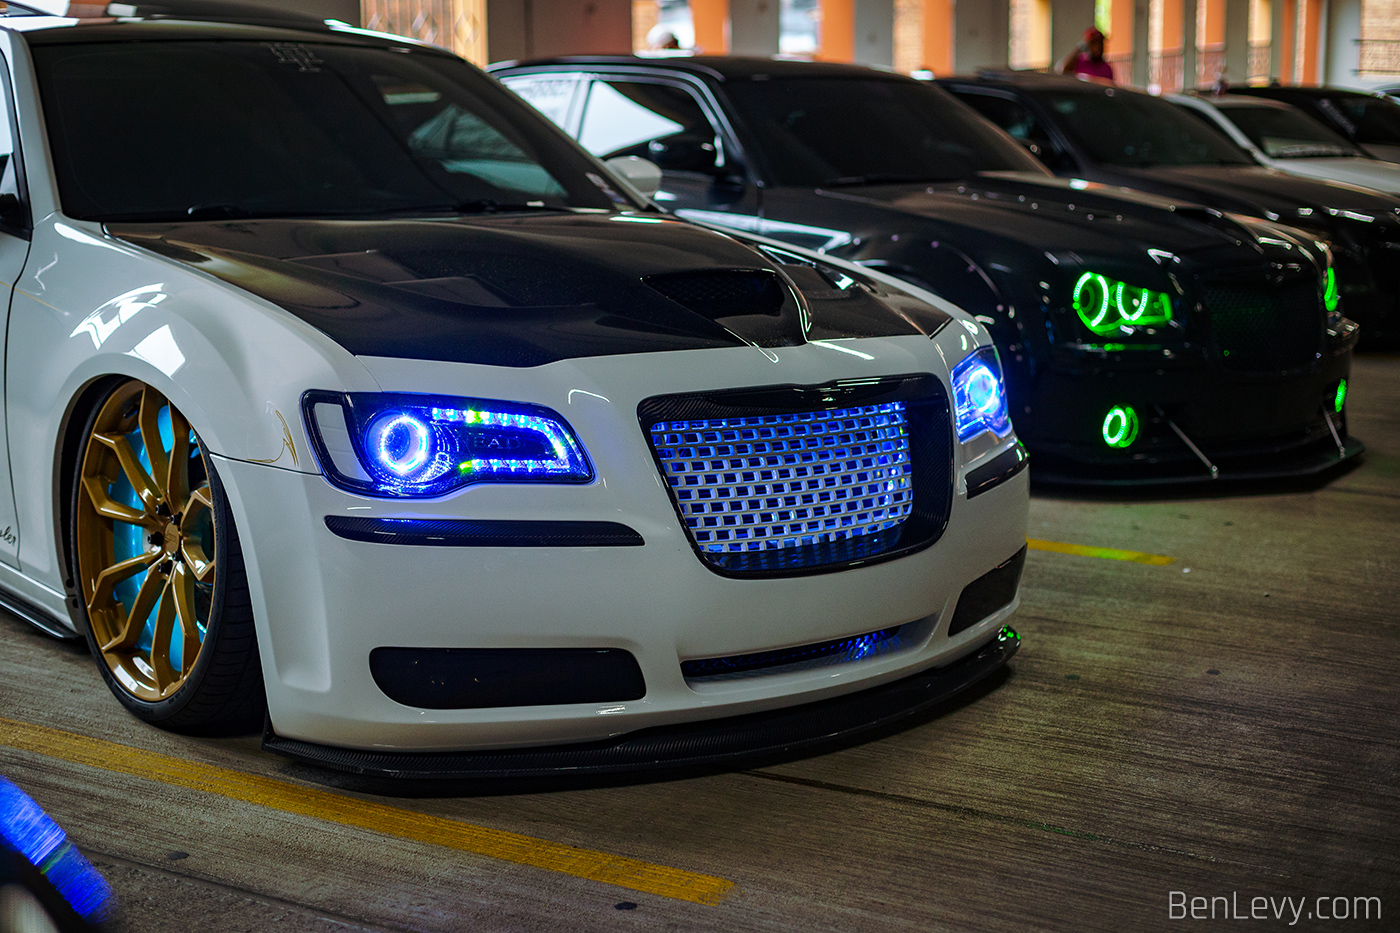 White Chrysler 300S with lights behind the grille